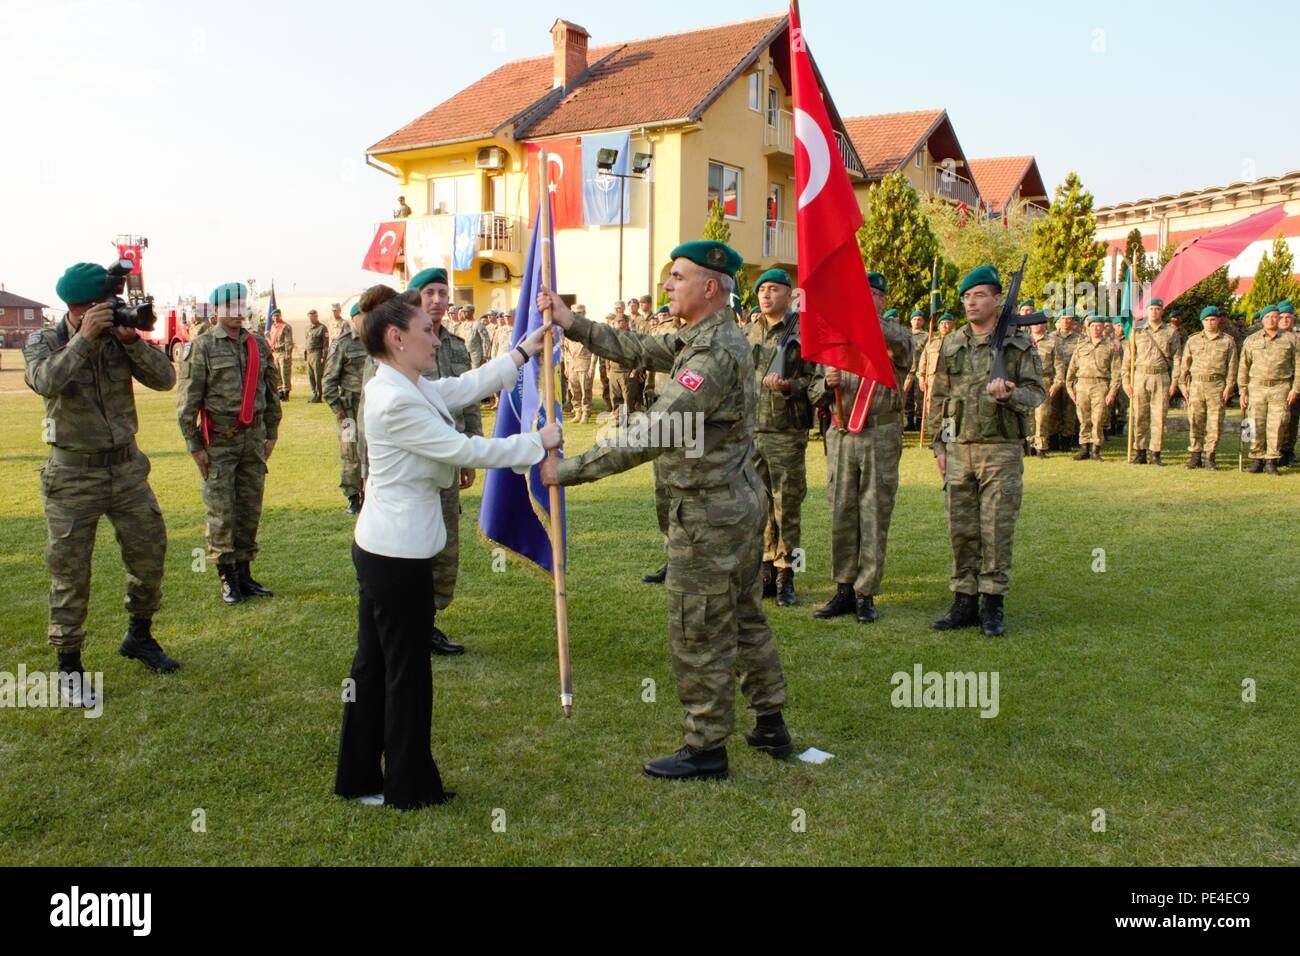 Turkey’s ambassador to Kosovo, Kivilcim Kilic, presents an honorary flag for the Turkish National Command Contingent to Kosovo to Col. Omer Faruk Demircioglu during his change of command ceremony Sept. 3, 2015, in Prizren, Kosovo. During the ceremony, Turkish Col. Saim Bagci assumed the command’s top post. JRD-S and its liaison monitoring teams are part of NATO’s peace support mission in the region, known as Kosovo Force.. (U.S. Army photo by Sgt. Erick Yates, Multinational Battle Group-East) Stock Photo